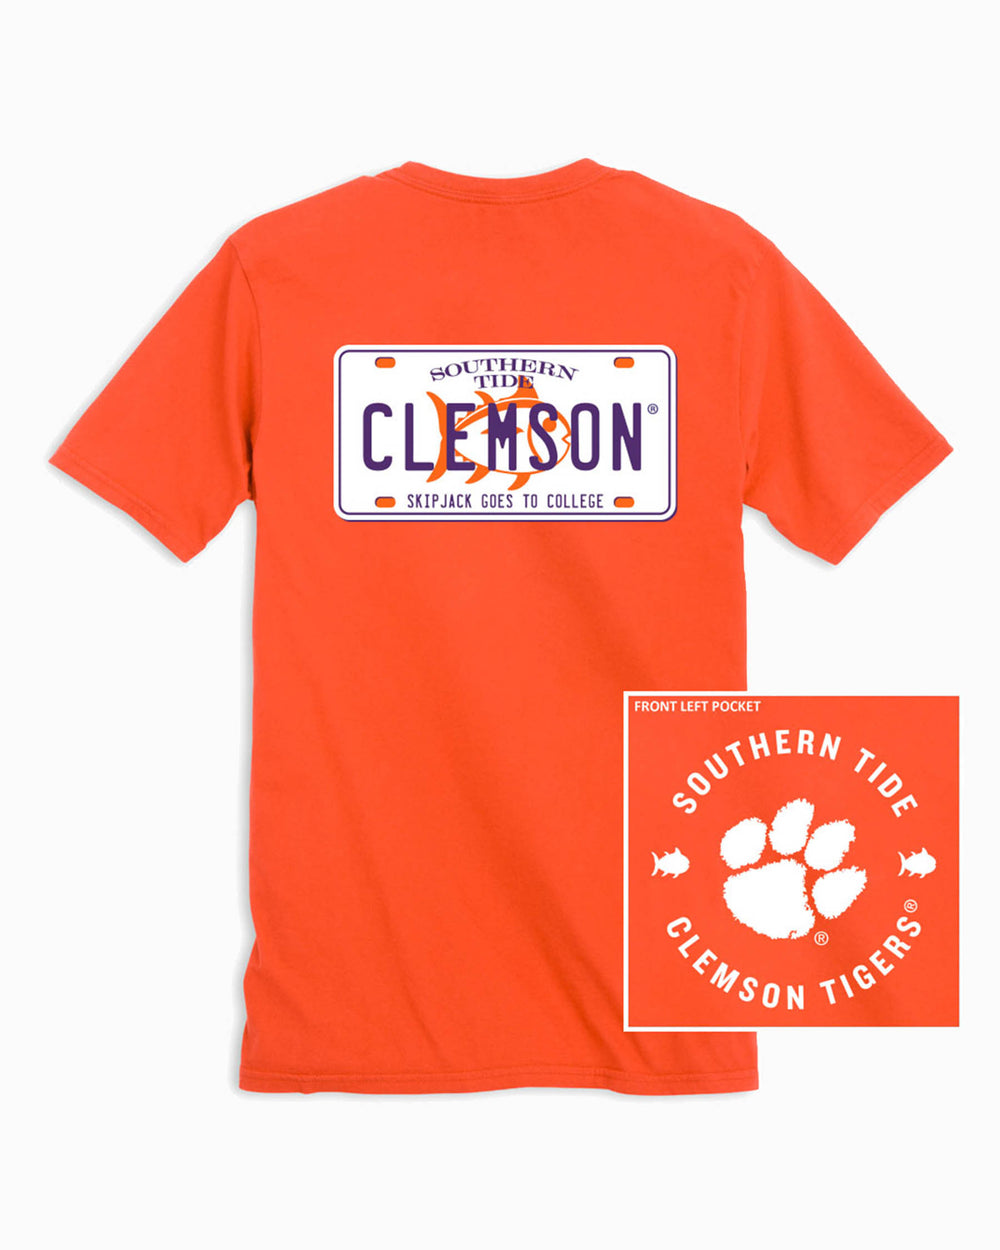 The front and back of the Clemson Tigers License Plate T-Shirt by Southern Tide - Endzone Orange